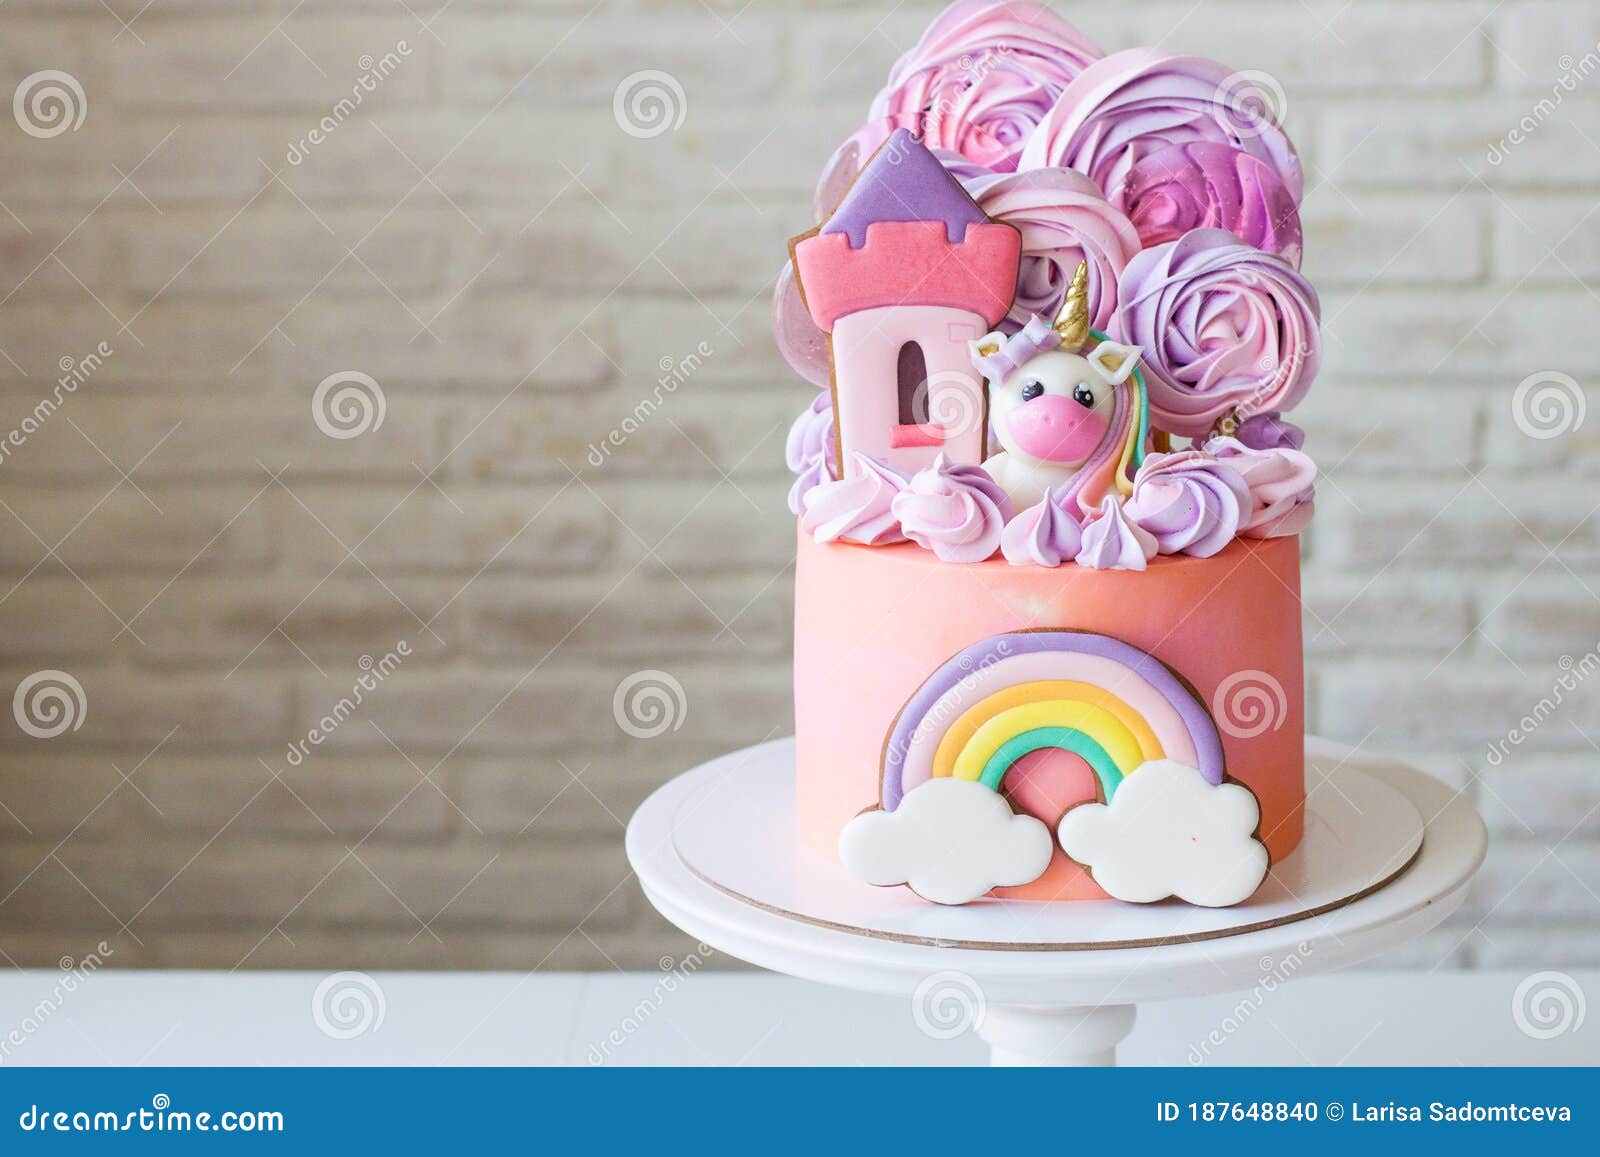 Cute Pink Birthday Cake For A Little Girl With Fondant Unicorn, Gingerbread  Princess Castle, Rainbow And Meringue Stock Photo - Image Of Fresh, Decor:  187648840